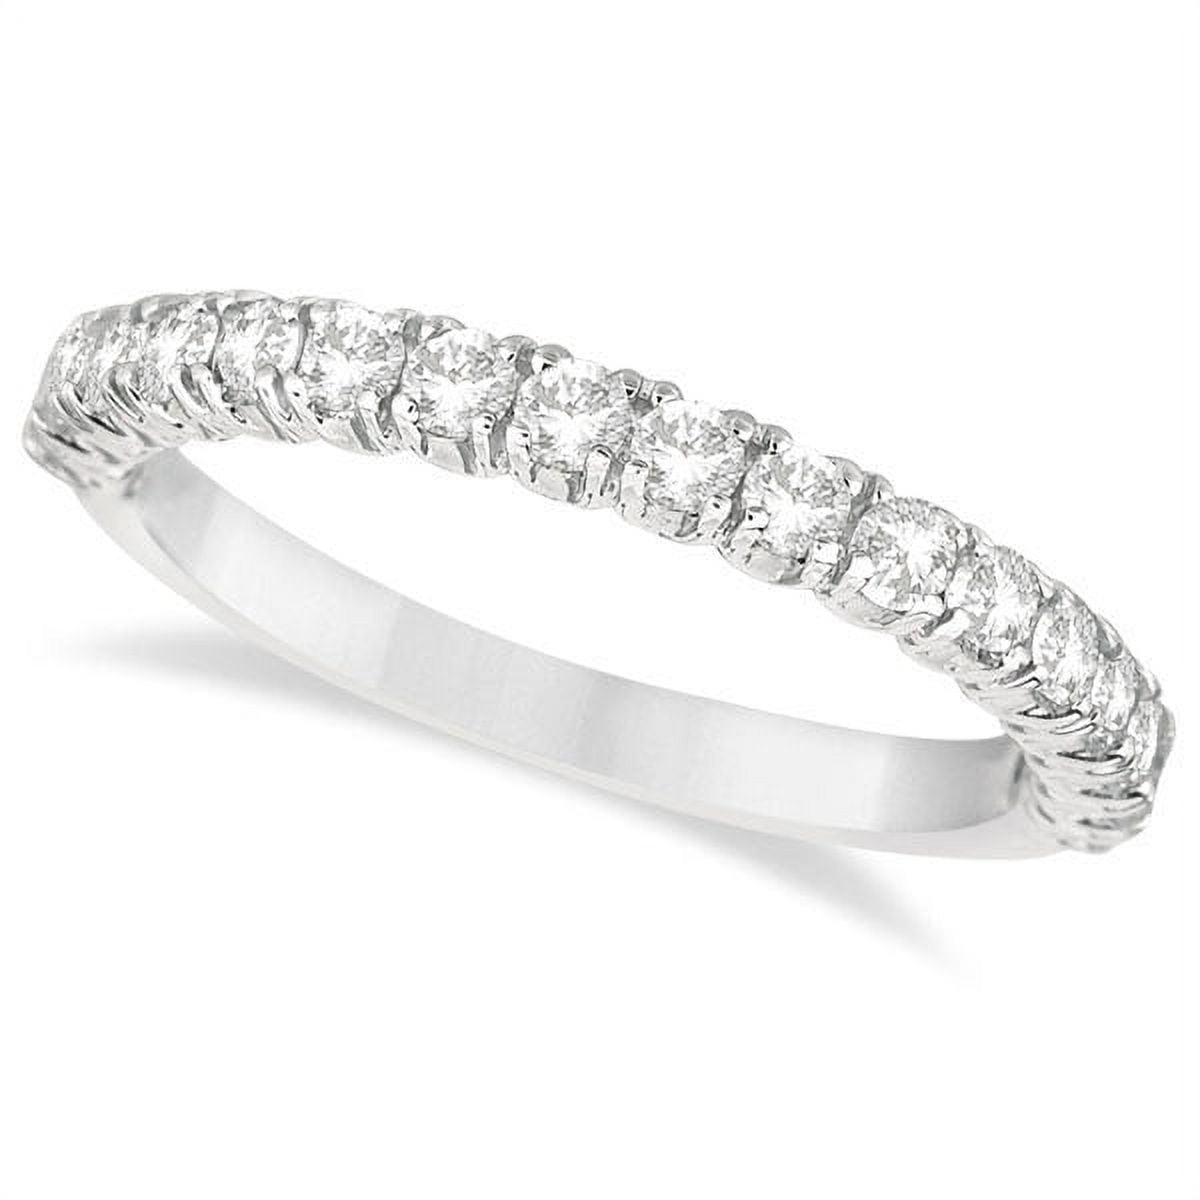 Shop 2 MM Eternity Band With CZ Stones in 14k white gold